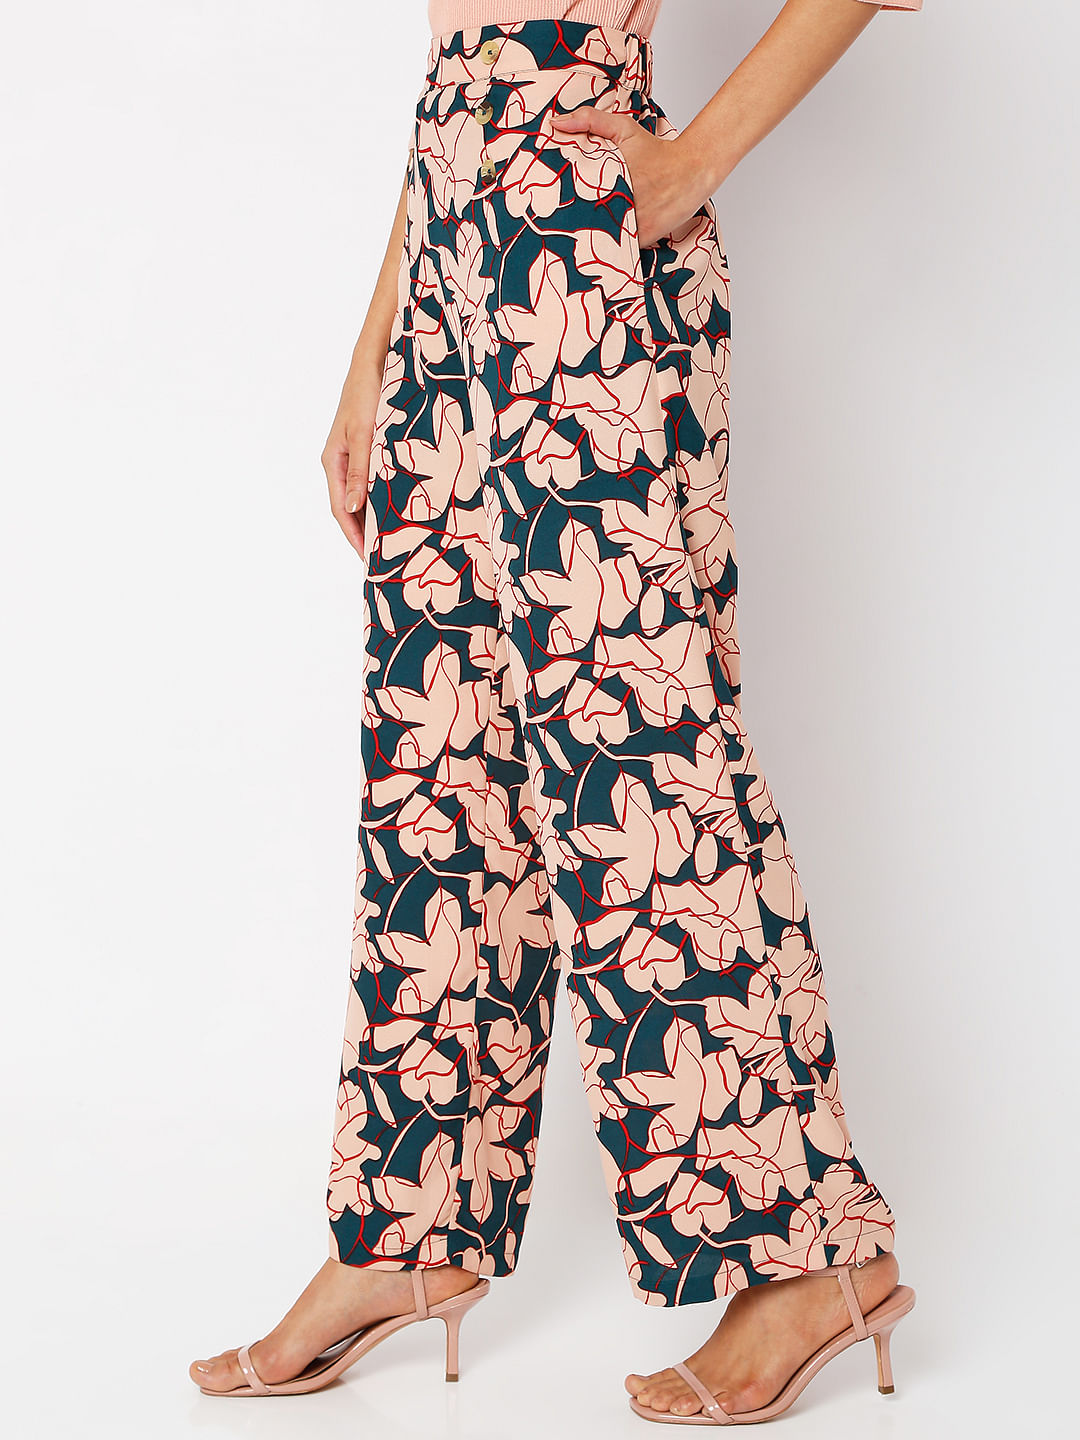 Shop Floral WideLeg Pants for Women from latest collection at Forever 21   490268